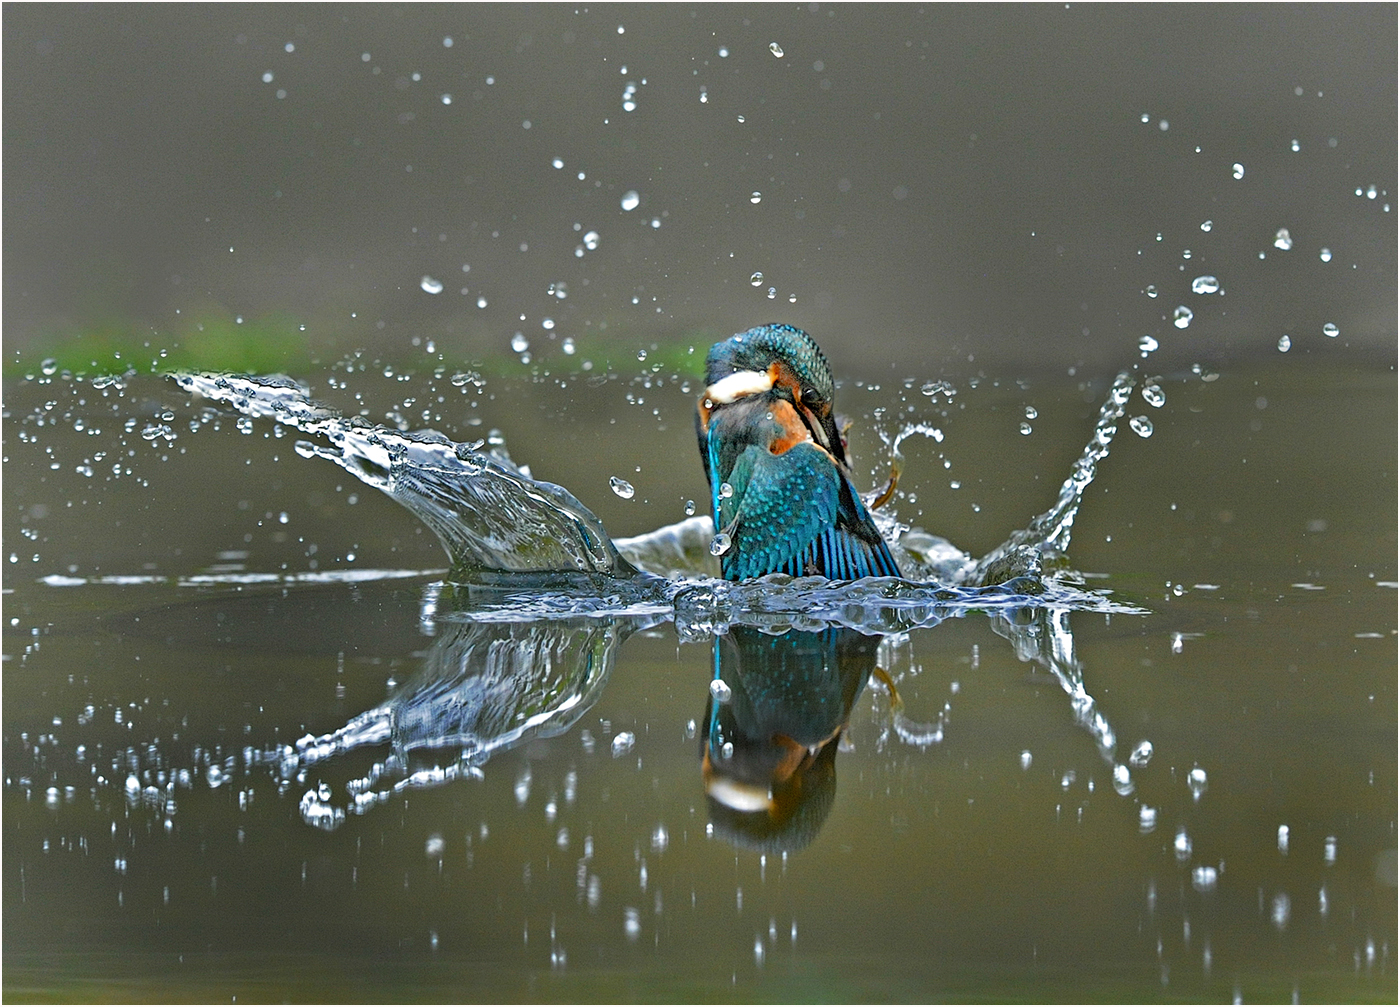 1st Place: Kingfisher Exiting the Water (Margaret Tabner)